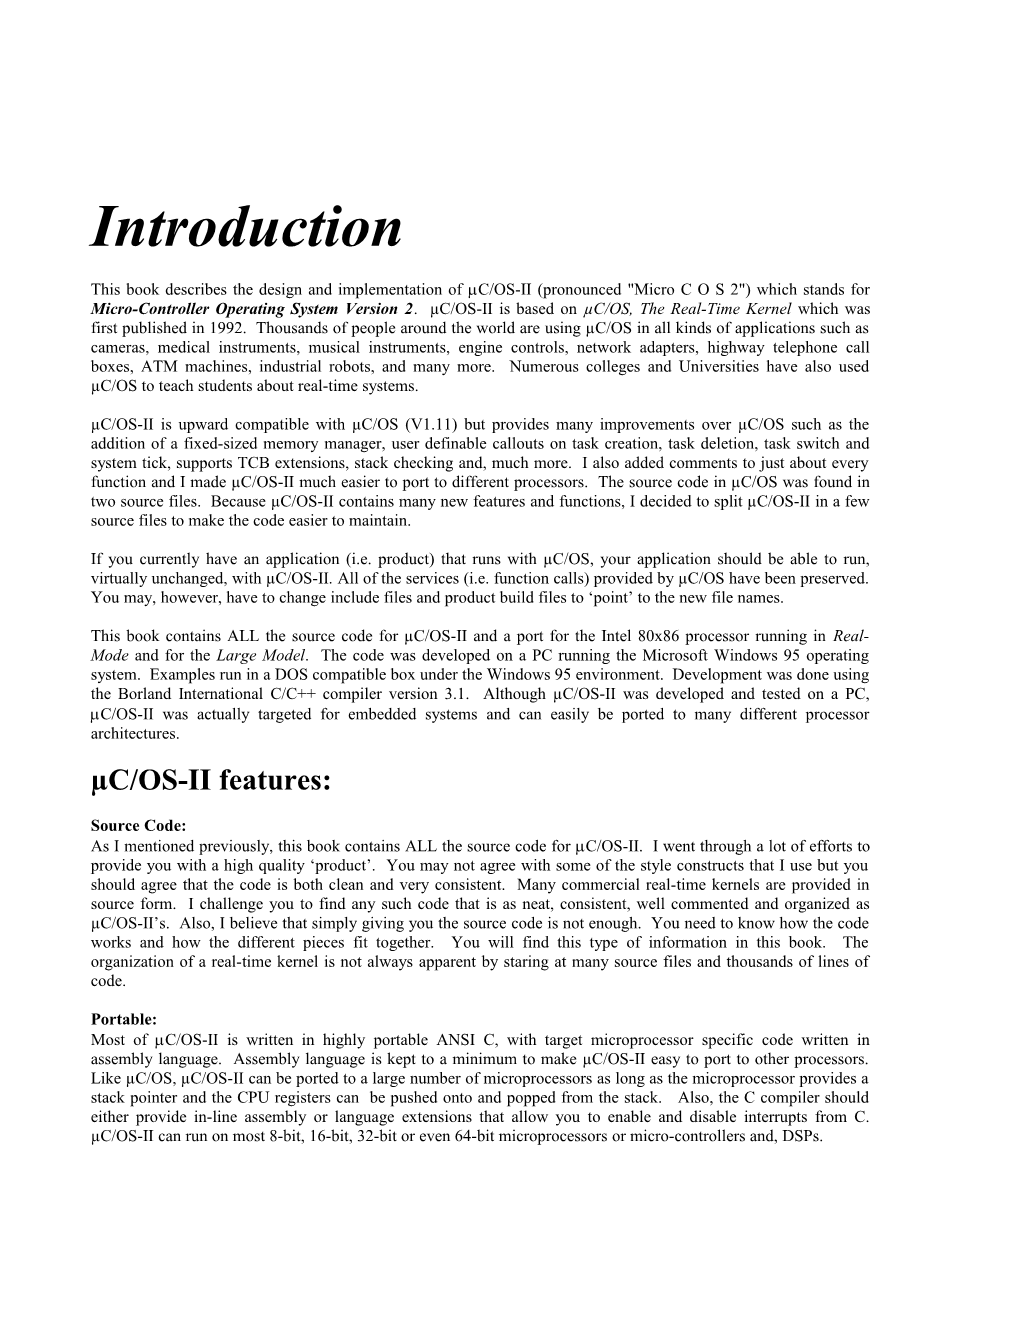 This Book Describes the Design and Implementation of C/OS-II (Pronounced Micro C O S 2